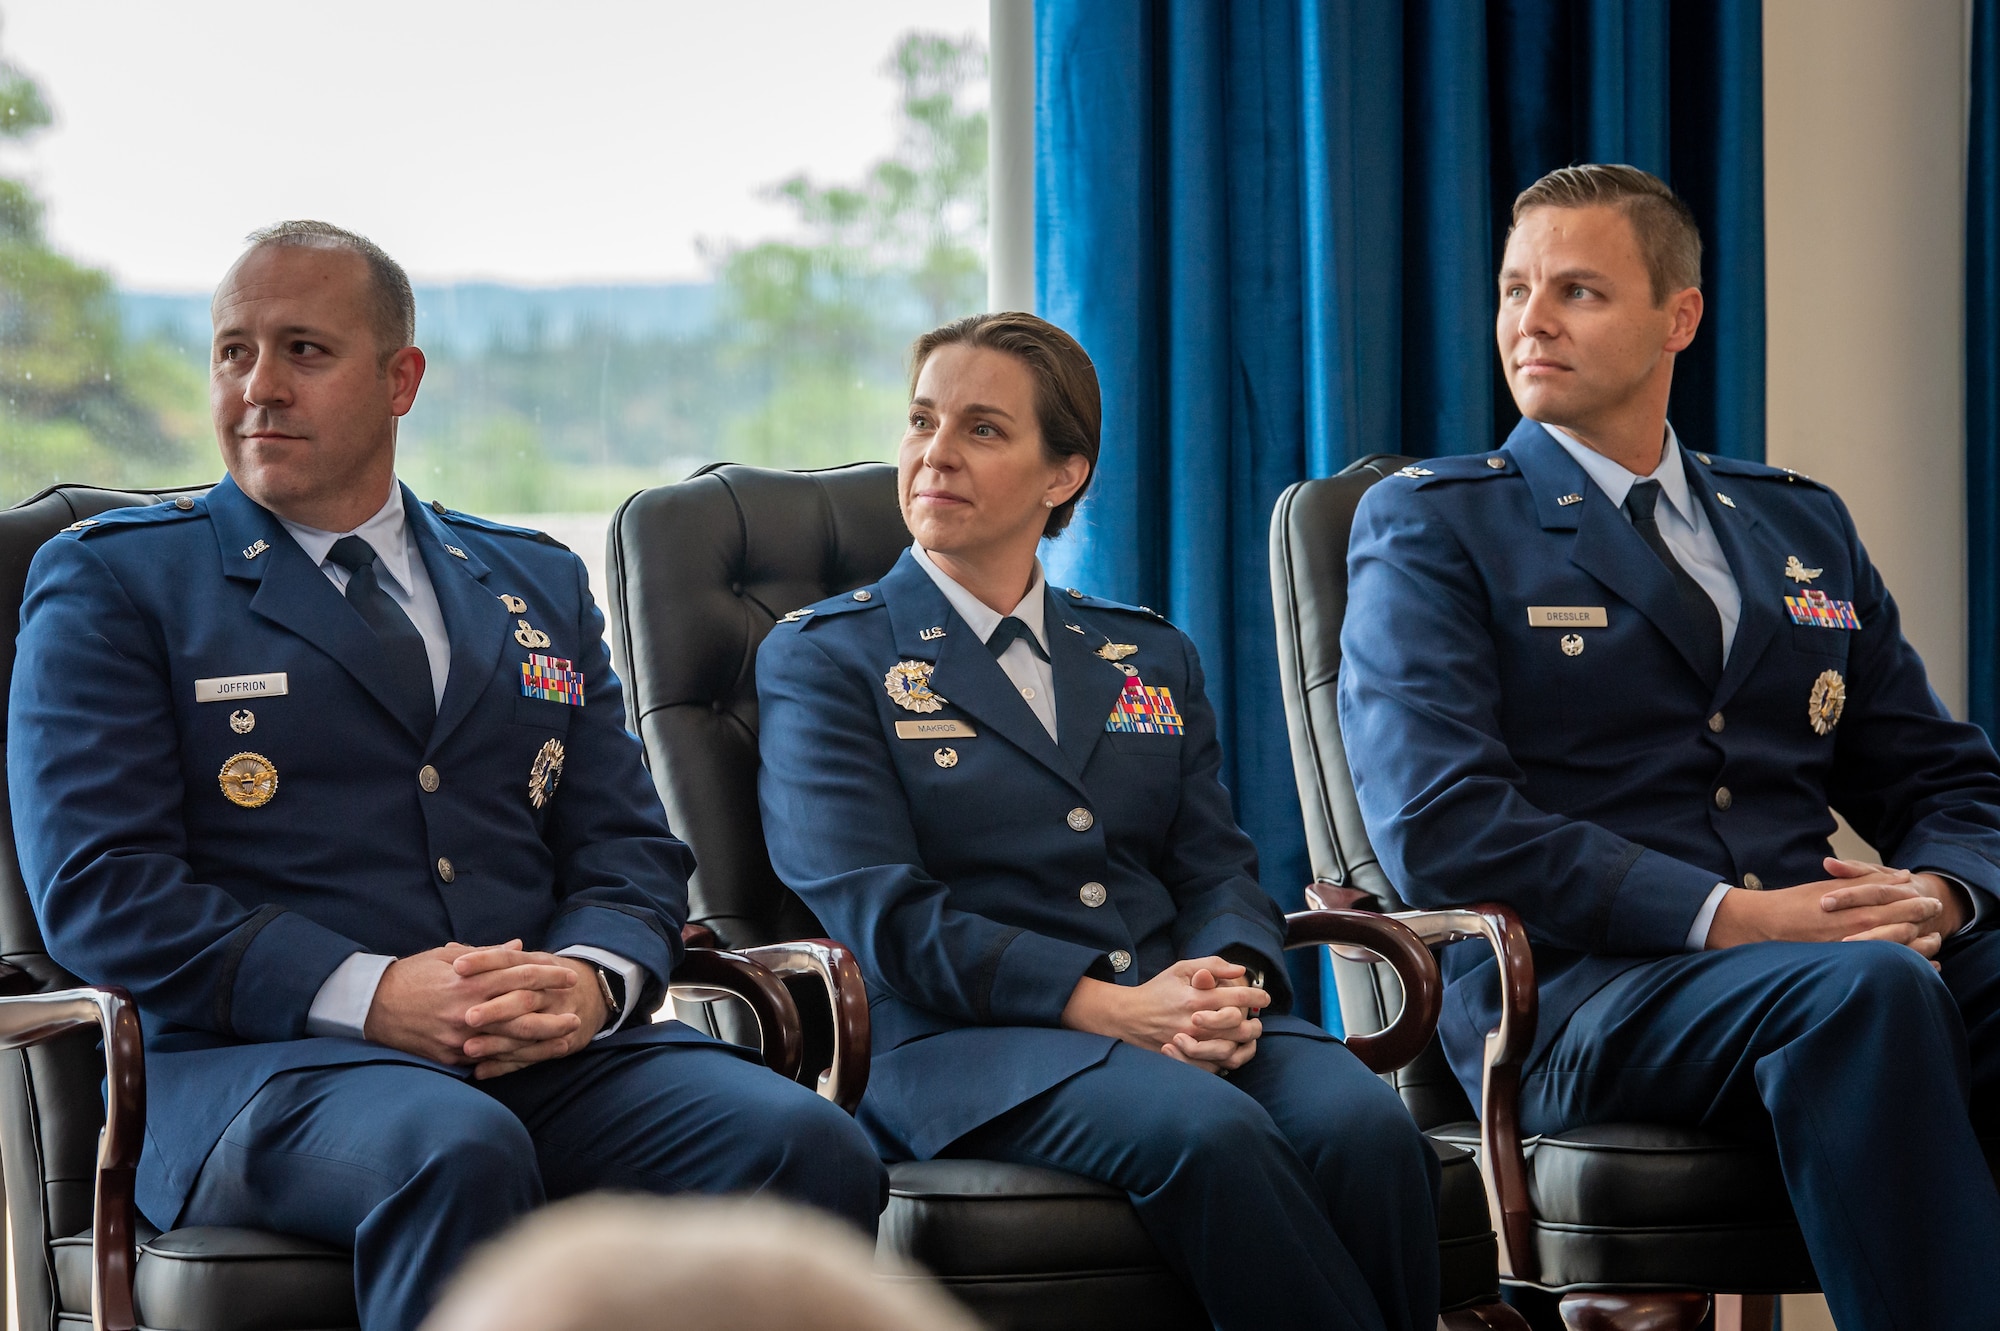 Three Air Force Academy Permanent Professors, Colonel Justin Joffrion, Colonel Beth Makros and Colonel Judson Dressler, sit during an Investiture Ceremony at Arnold Hall, U.S. Air Force Academy Colorado on August 19th 2022.